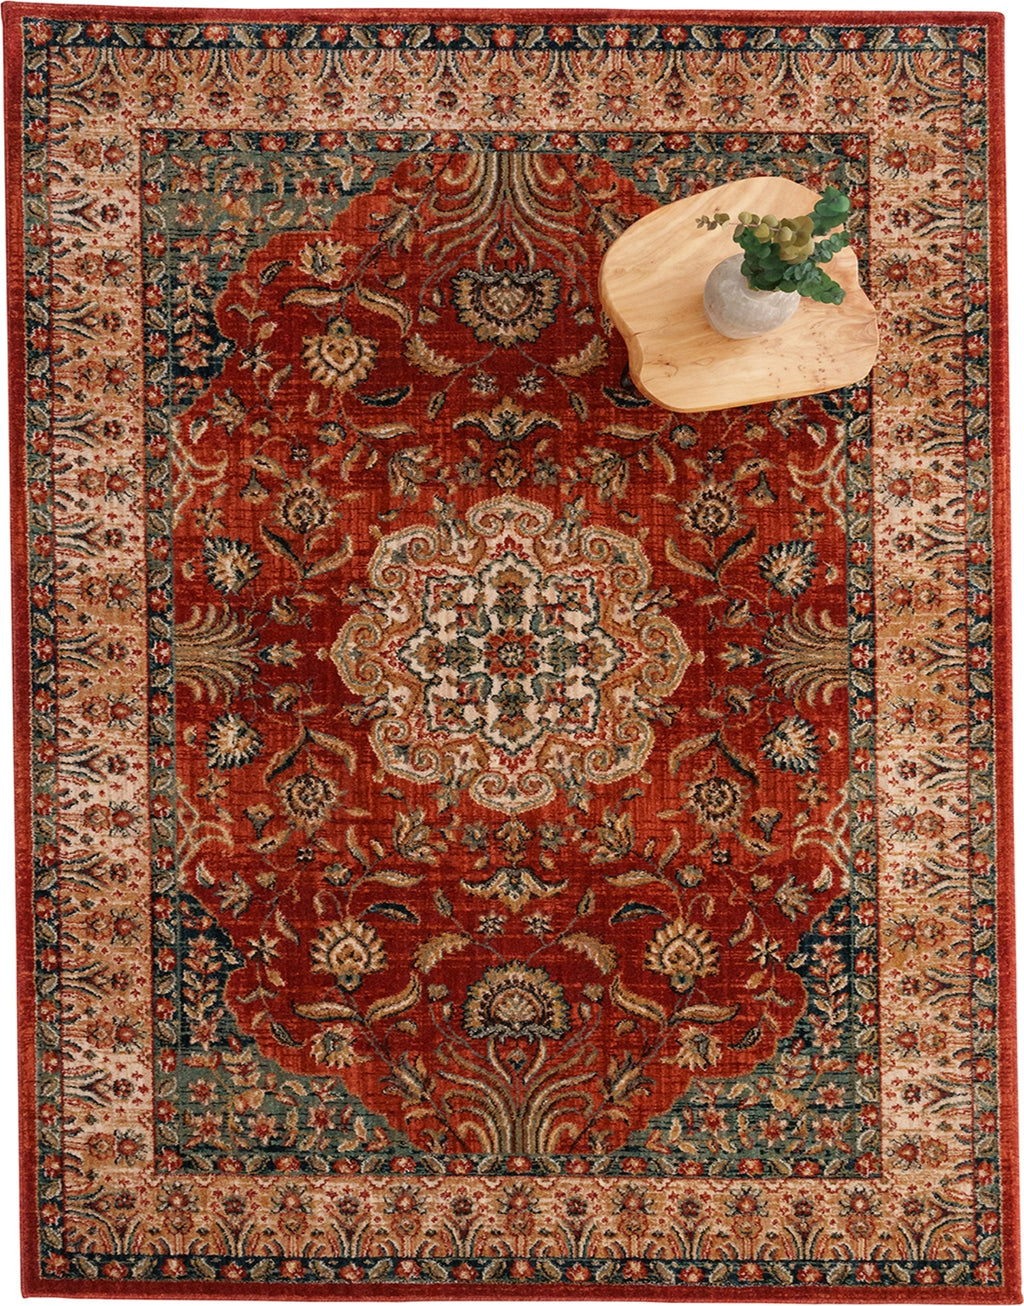 Capel Thrace-Heriz 4401 Copper Area Rug Rectangle Roomshot Image 1 Feature